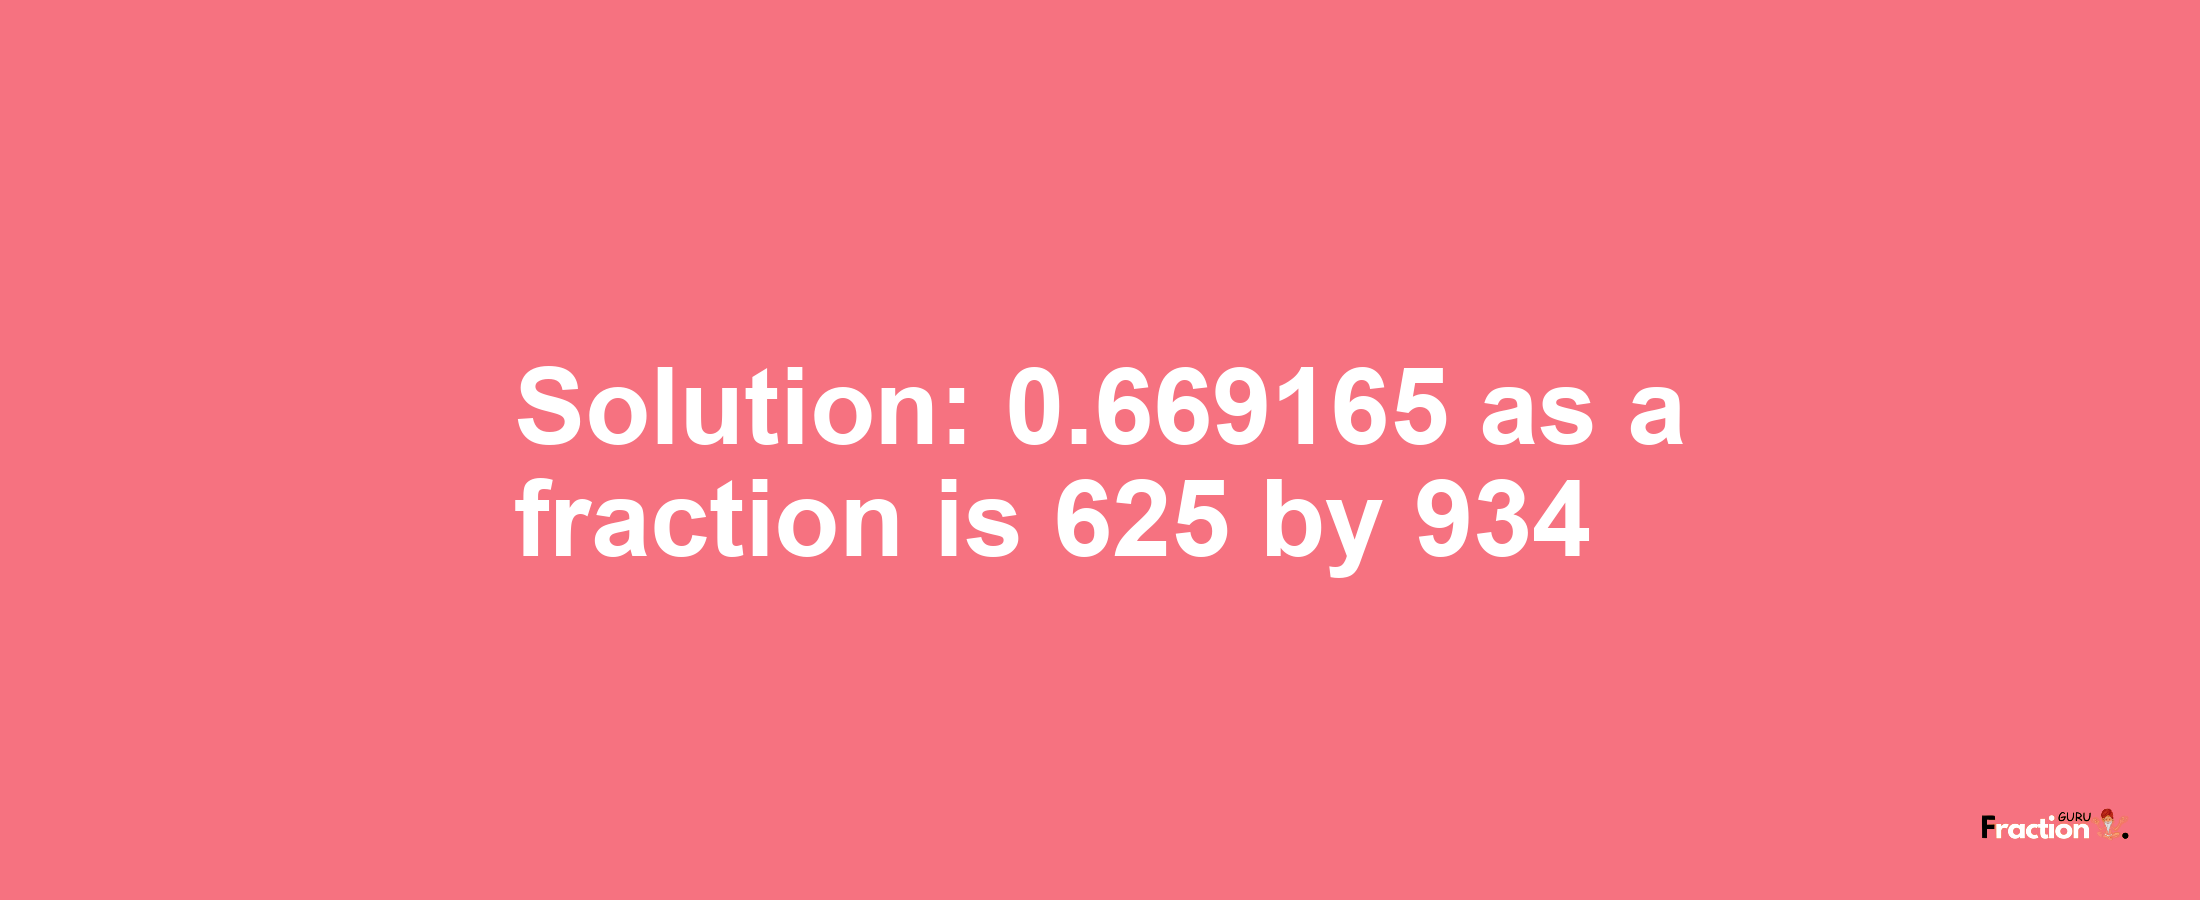 Solution:0.669165 as a fraction is 625/934